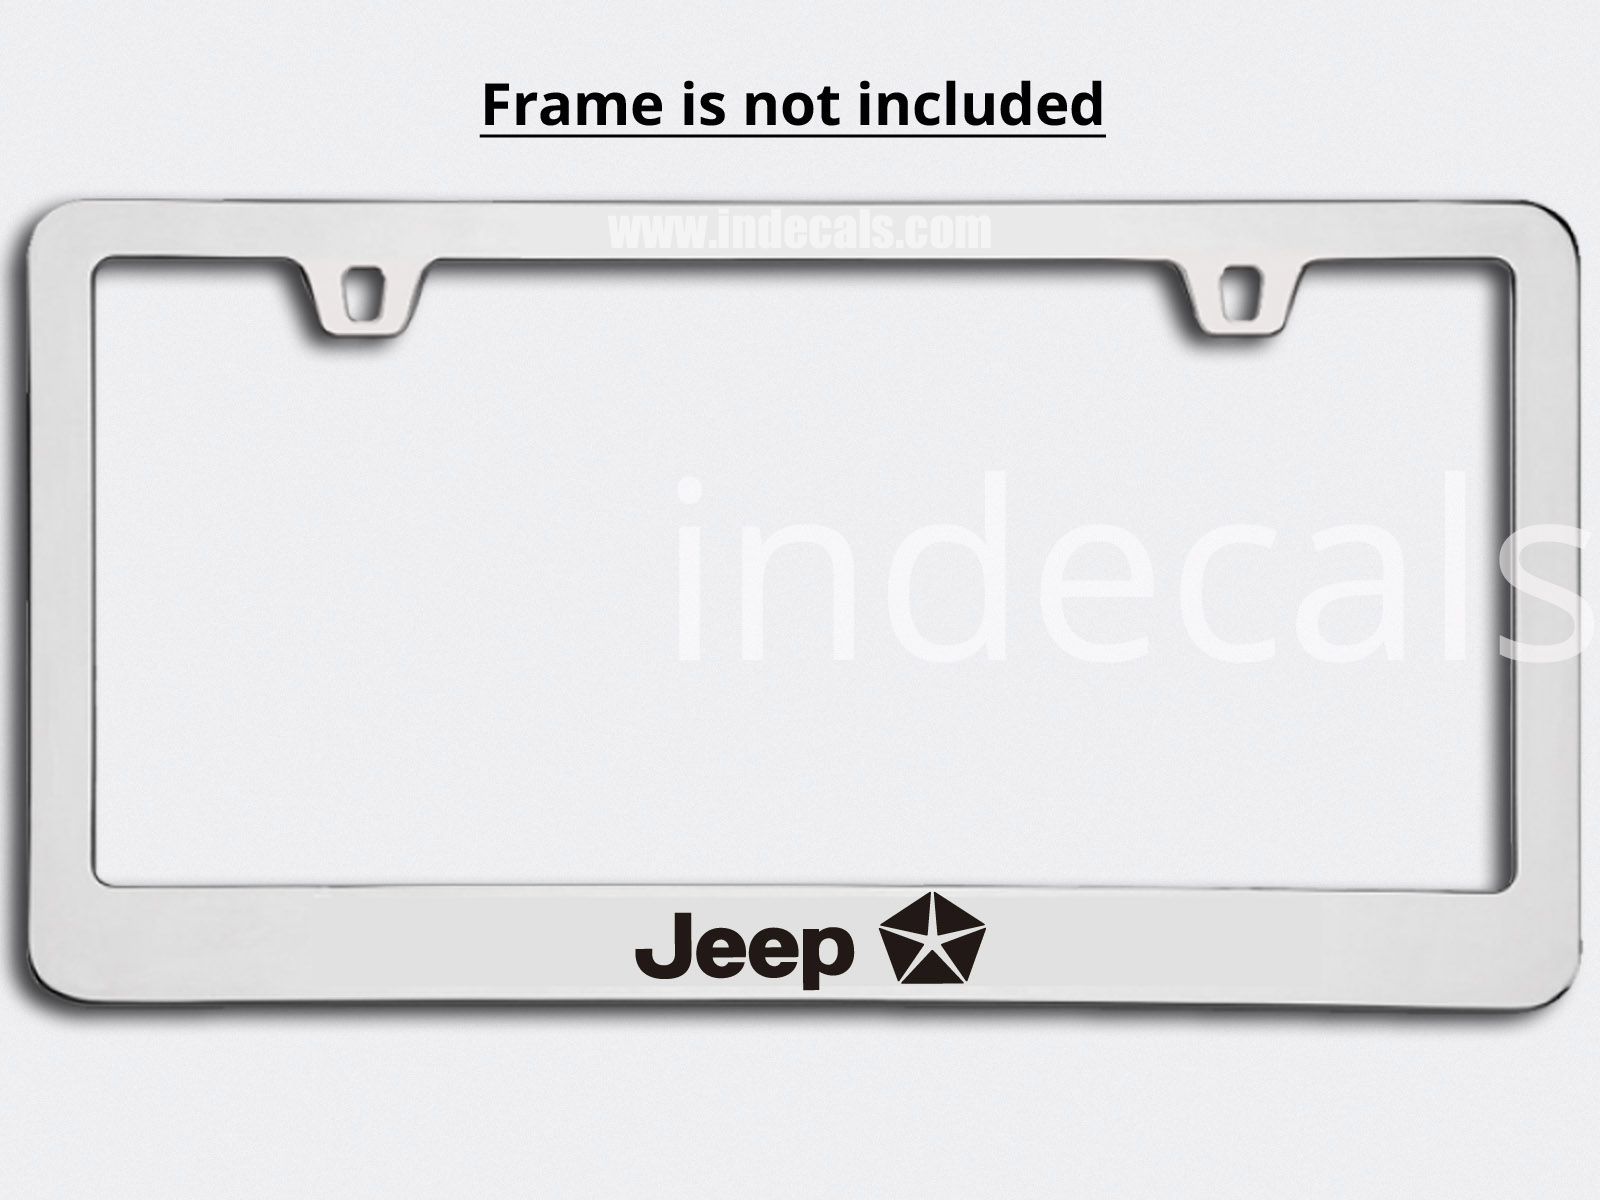 3 x Jeep Stickers for Plate Frame - Black